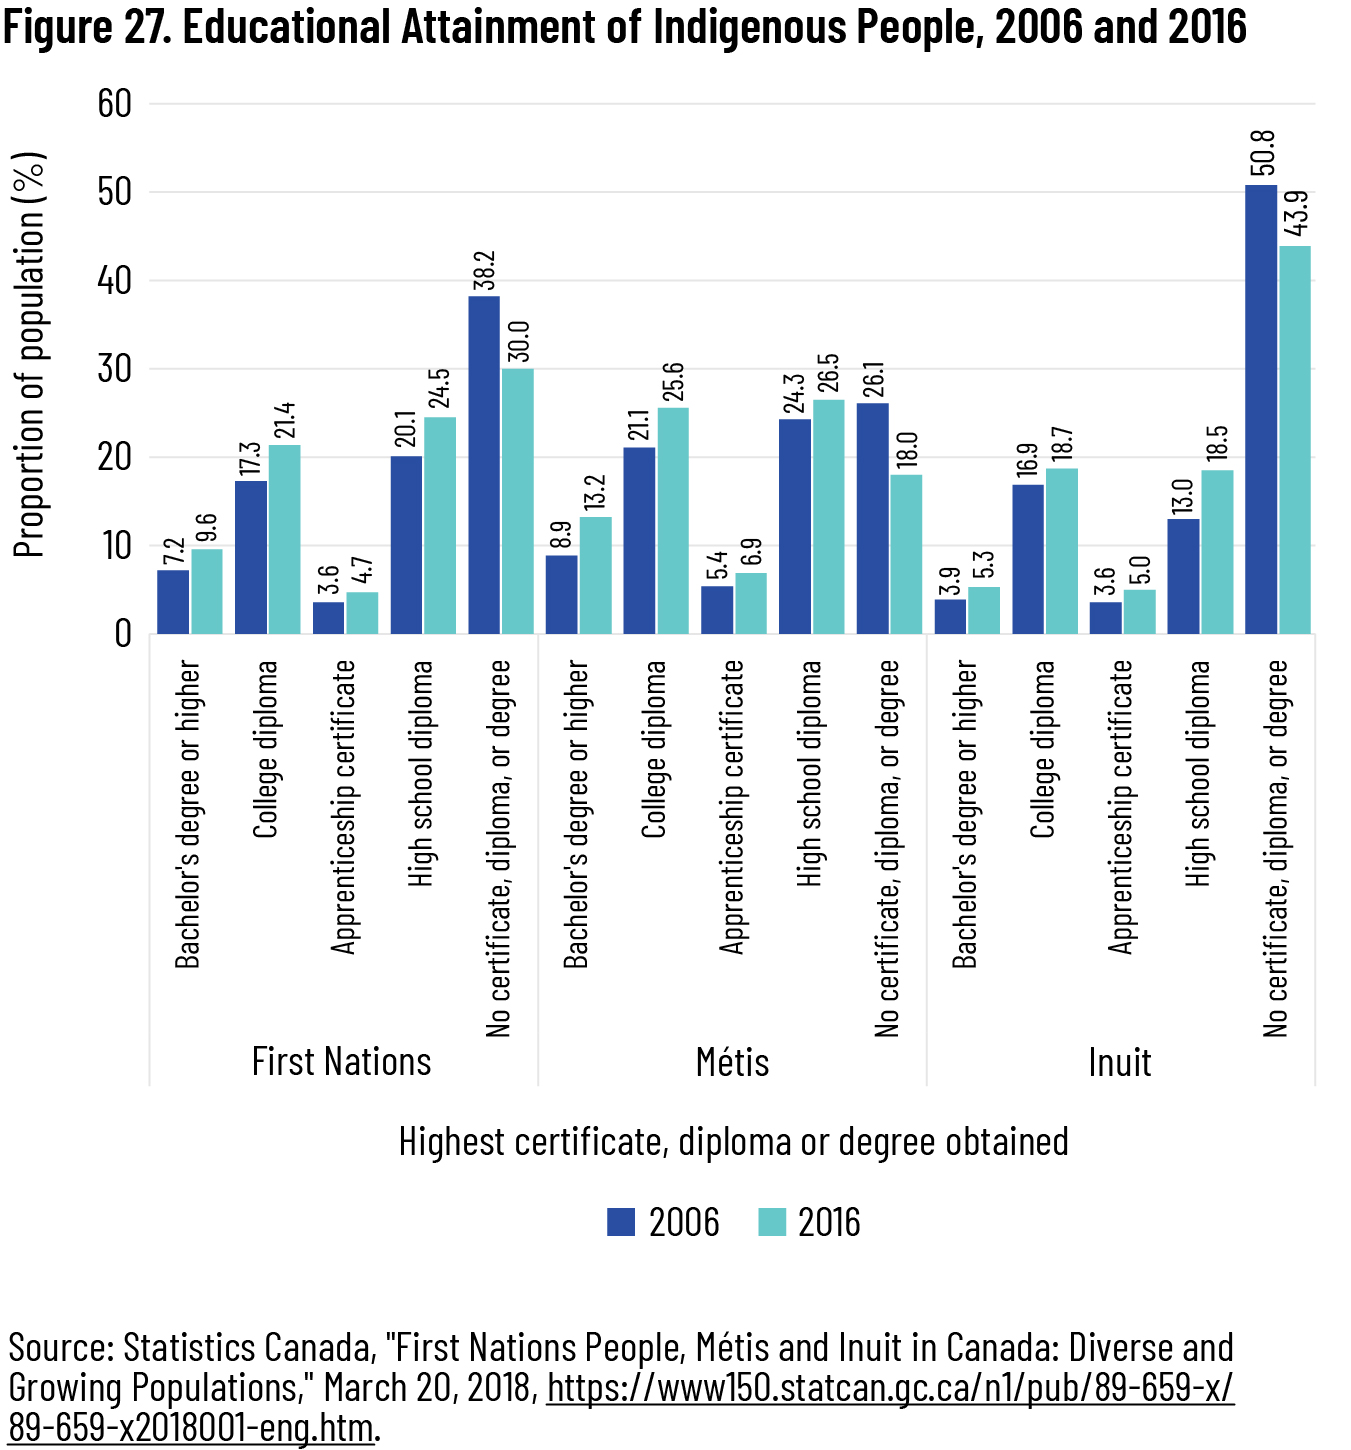 Figure 27. Educational Attainment of Indigenous People, 2006 and 2016